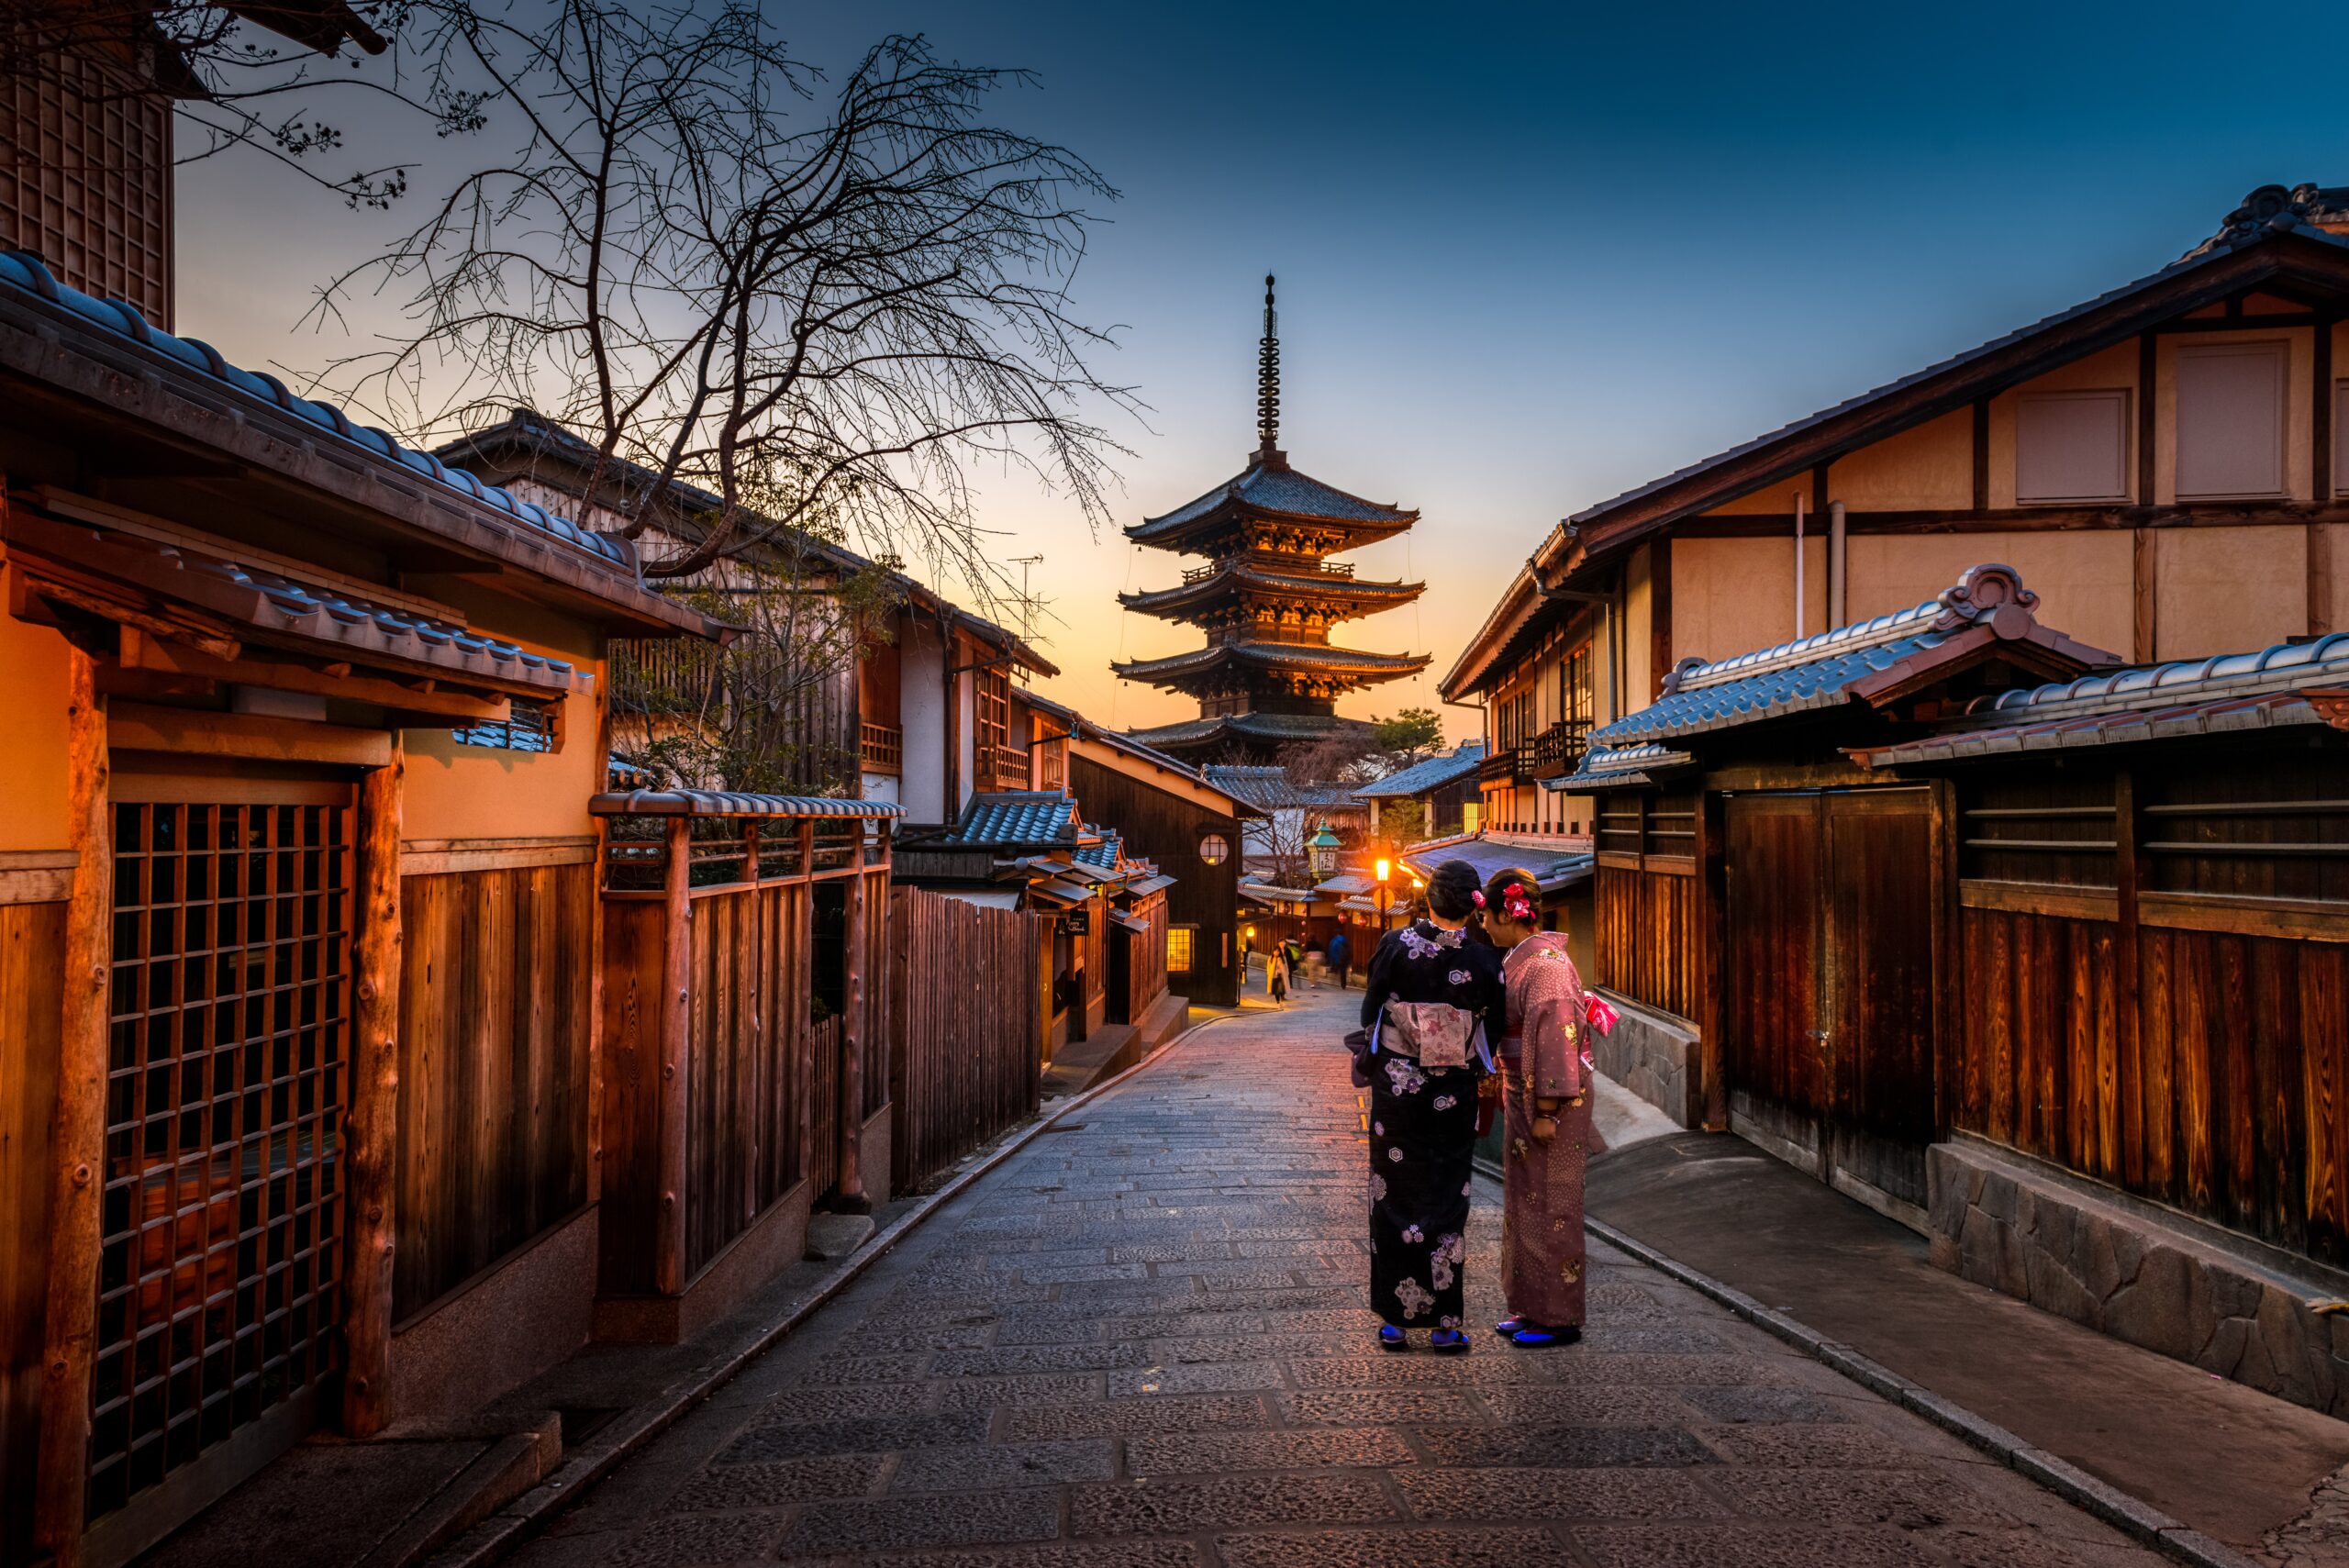 These luxury hotels in Kyoto are great for travelers trying to have relaxing and high end trips.
pictured: A temple of Kyoto with two women in traditional kimonos 